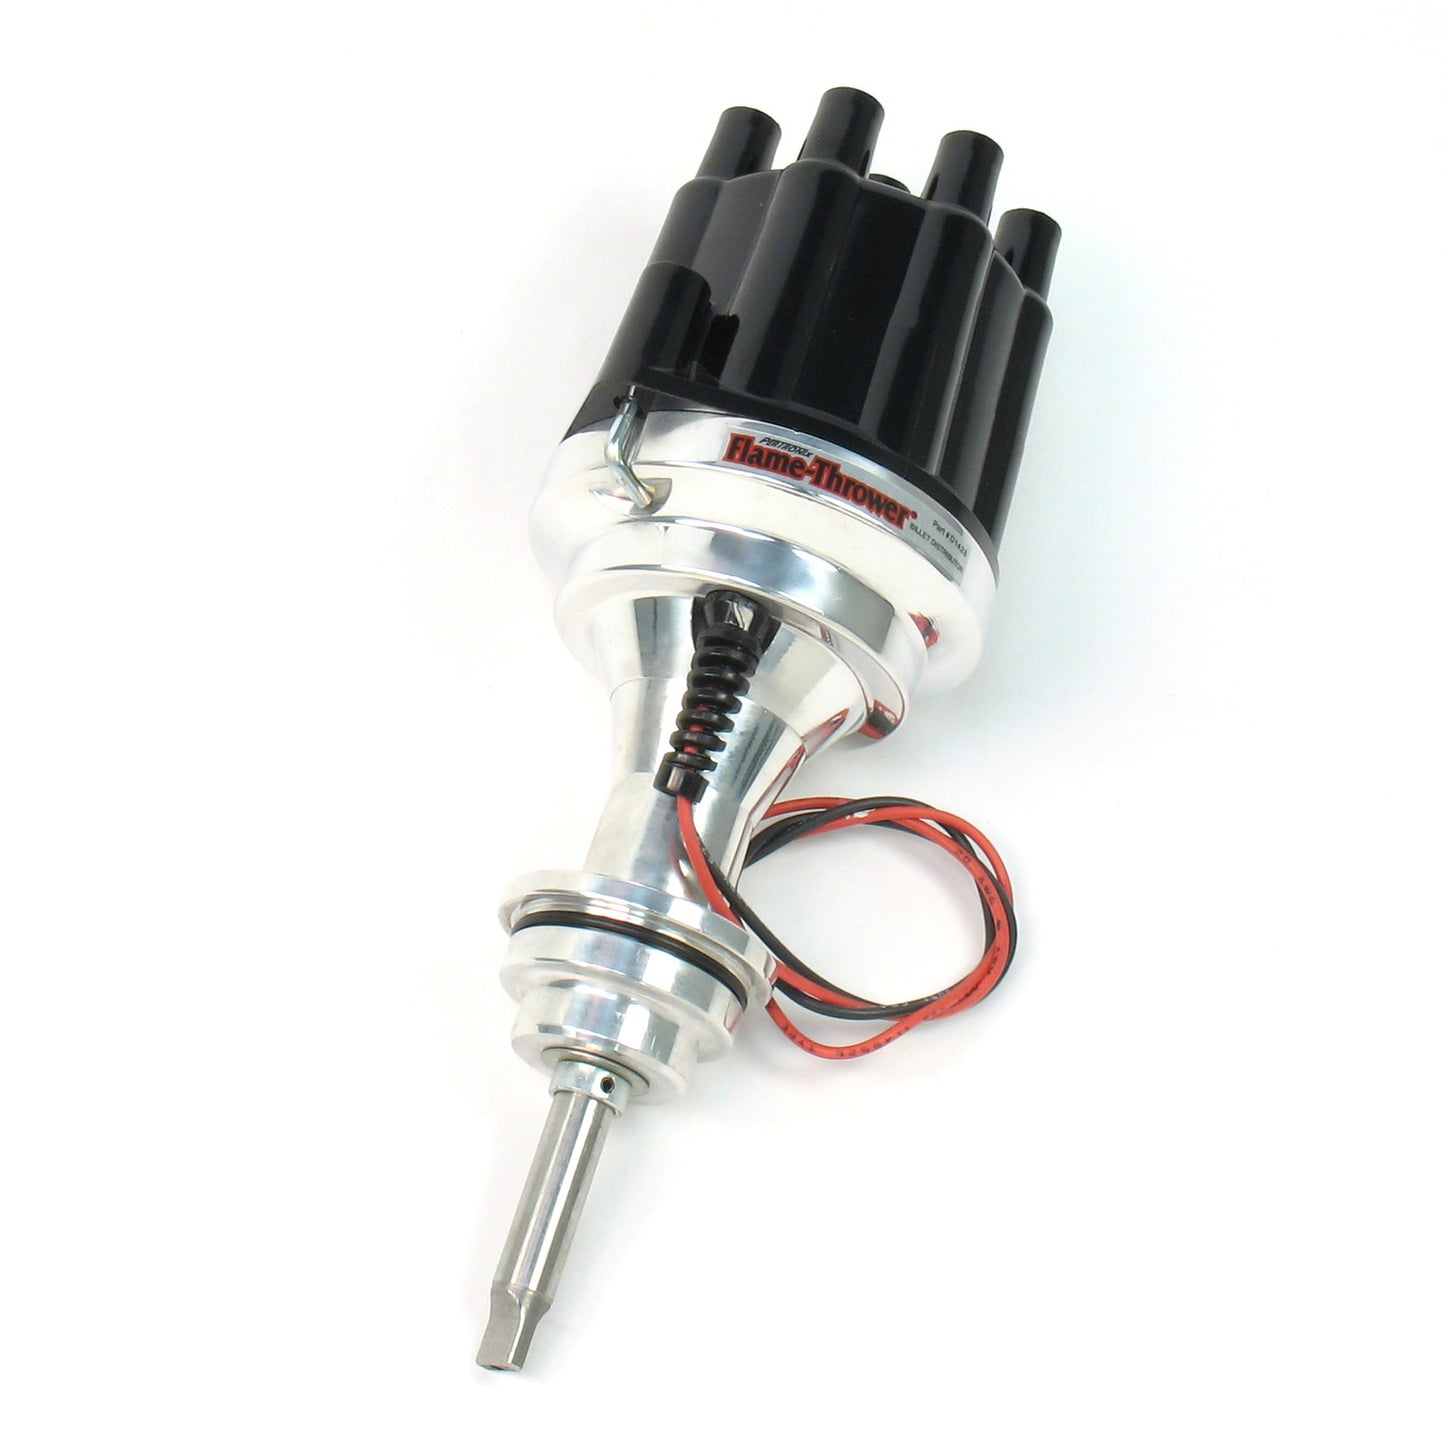 PerTronix D142800 Flame-Thrower Electronic Distributor Billet Chrysler/Dodge/Plymouth 383-400 Plug and Play with Ignitor II Technology Non Vacuum Advance Black Cap